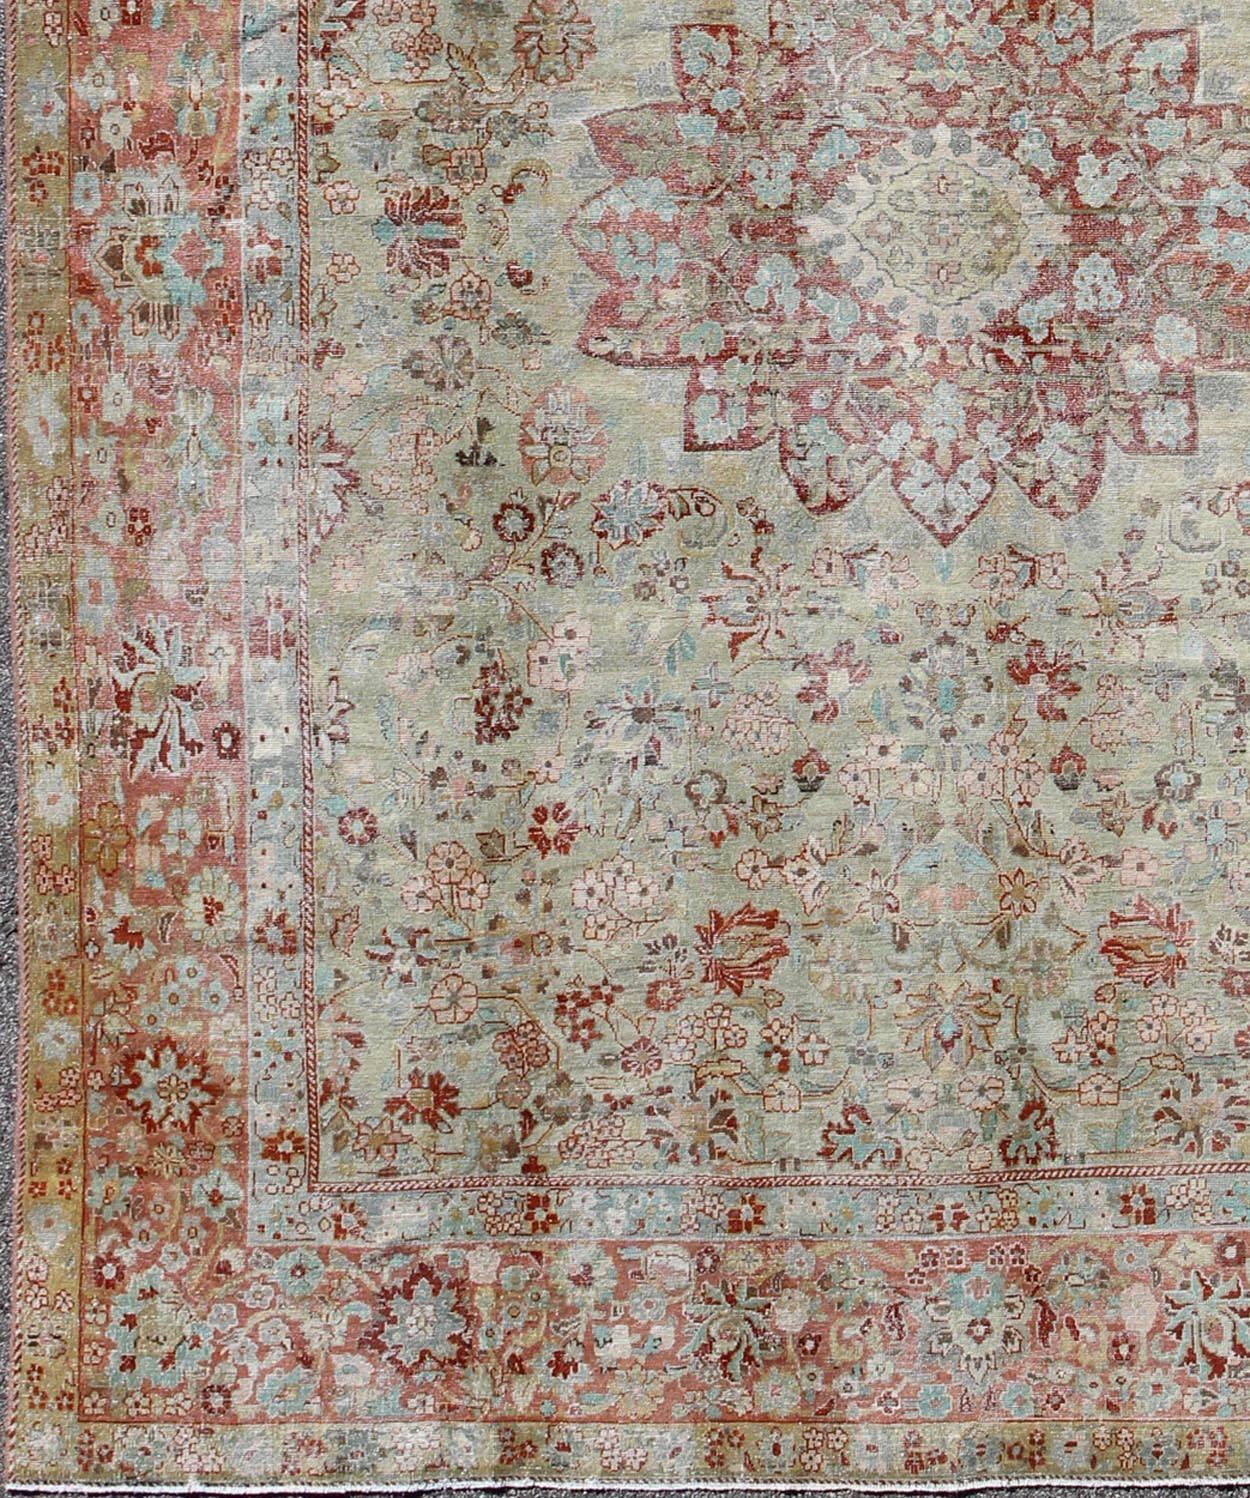 Antique Persian Sultanabad rug with all-over vining floral design in ice blue, rug na-170062, country of origin / type: Iran / Sultanabad, circa 1930

This beautiful and large antique Persian Sultanabad rug displays a gorgeous, all-over vining